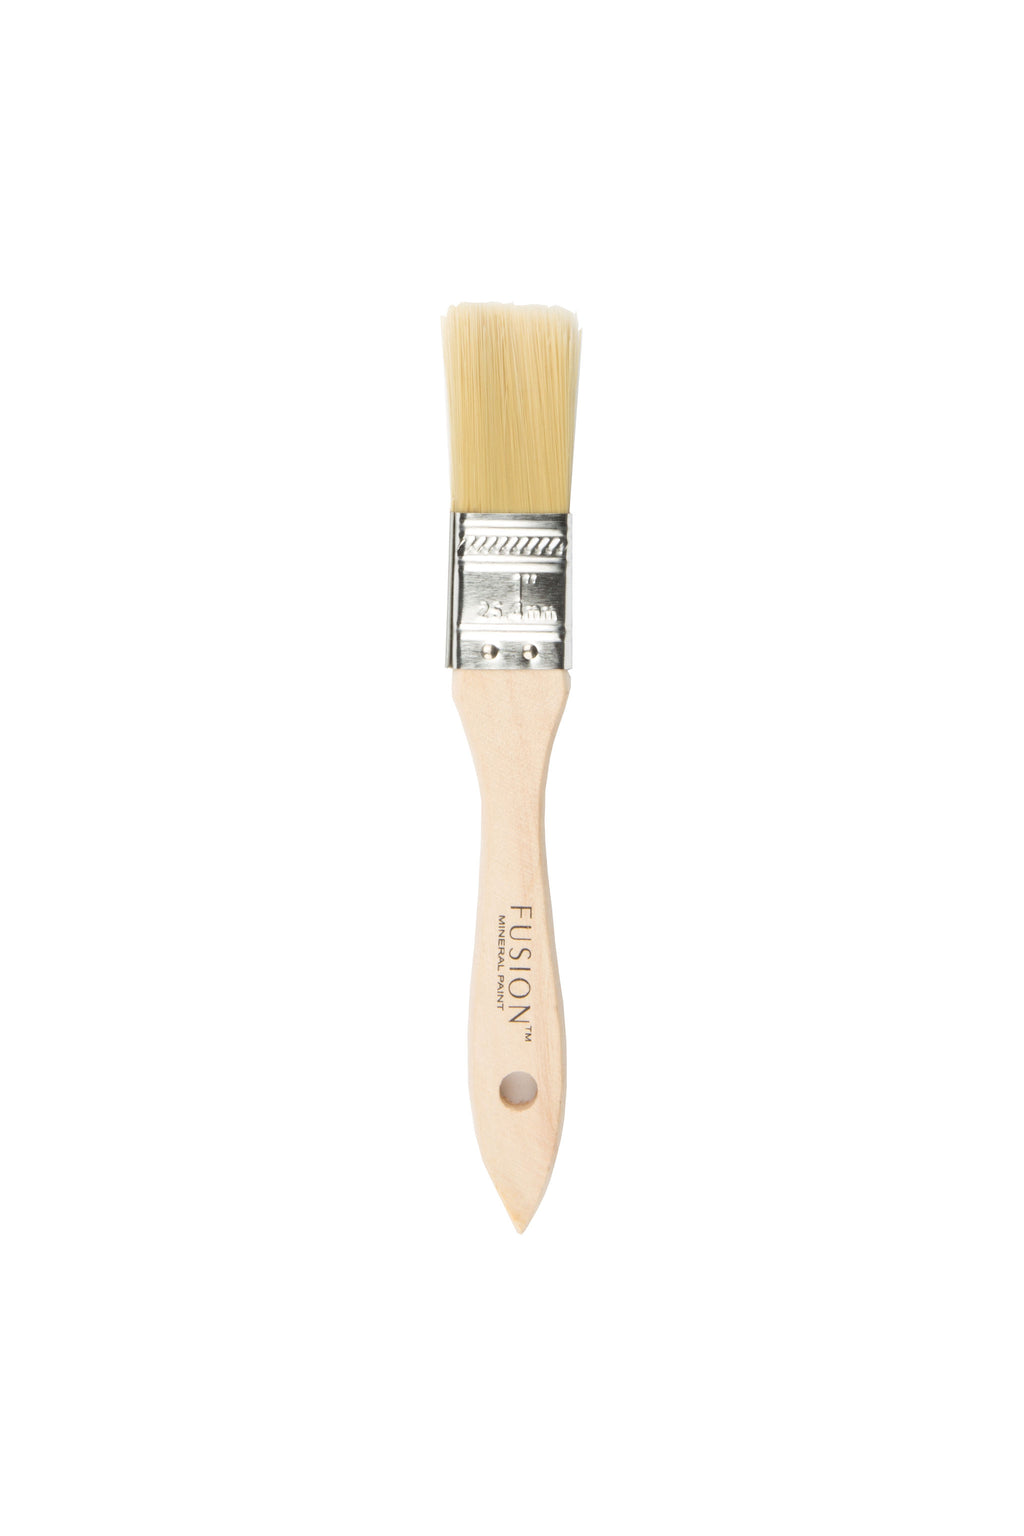 Fusion Mineral Paint Synthetic Flat Brush 1 inch